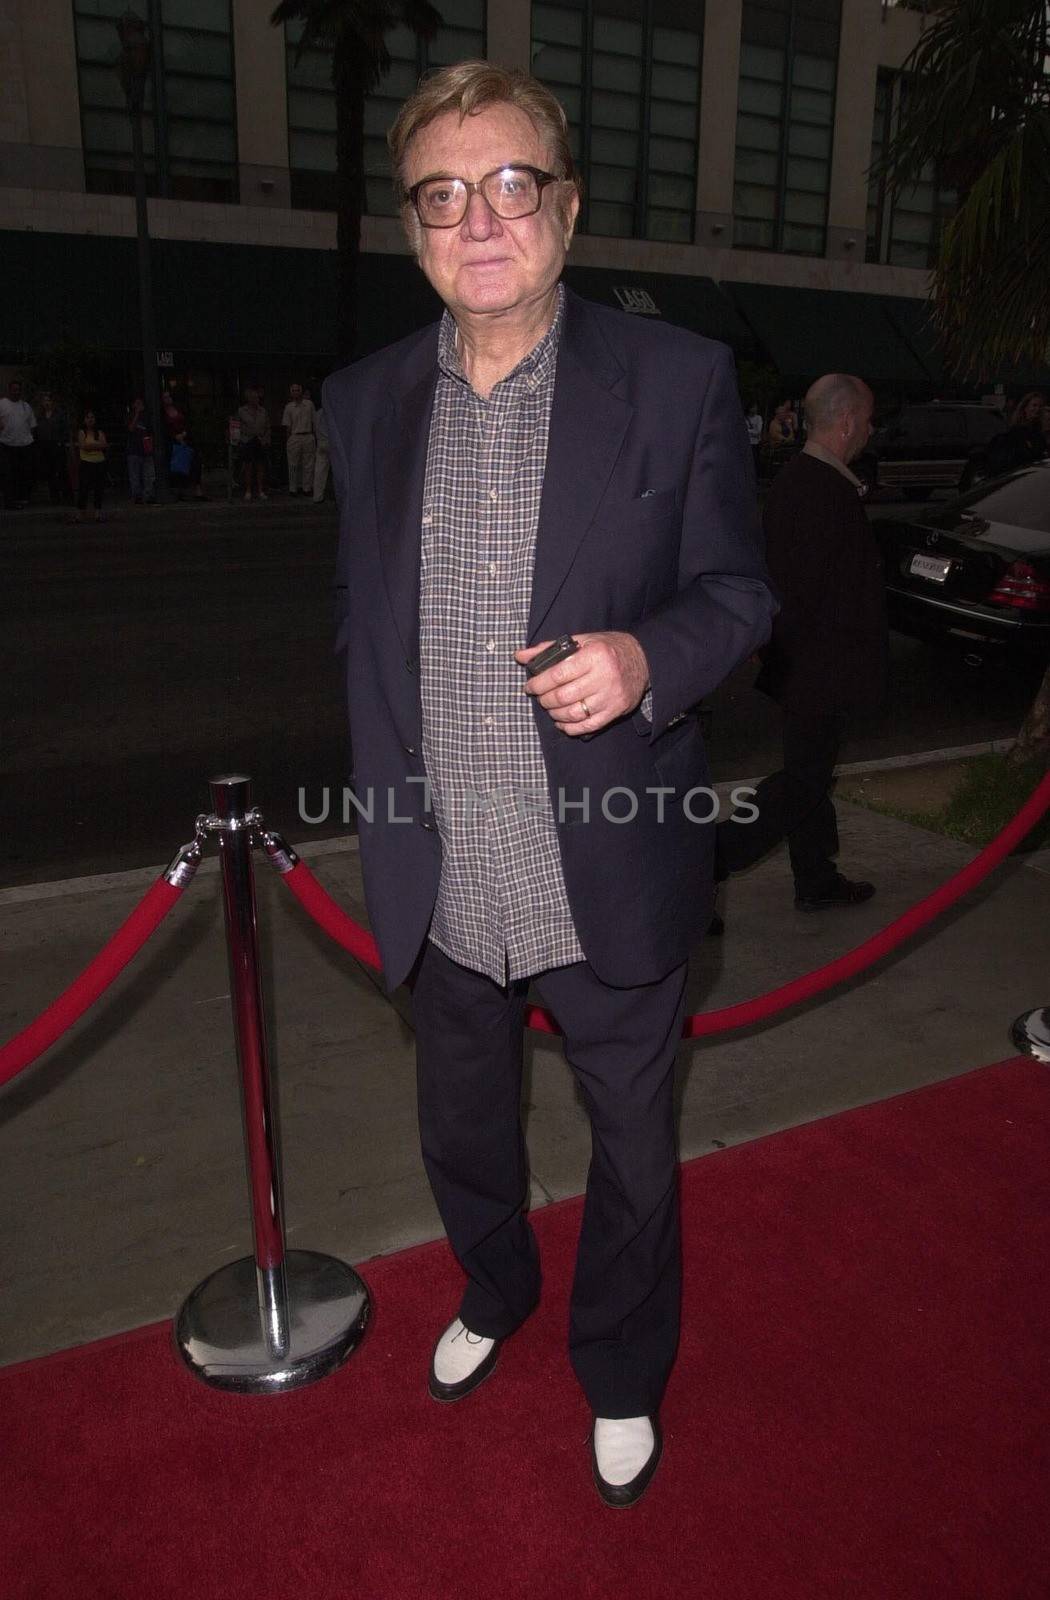 Steve Allen at the premiere of My 5 Wives in Santa Monica. 08-28-00